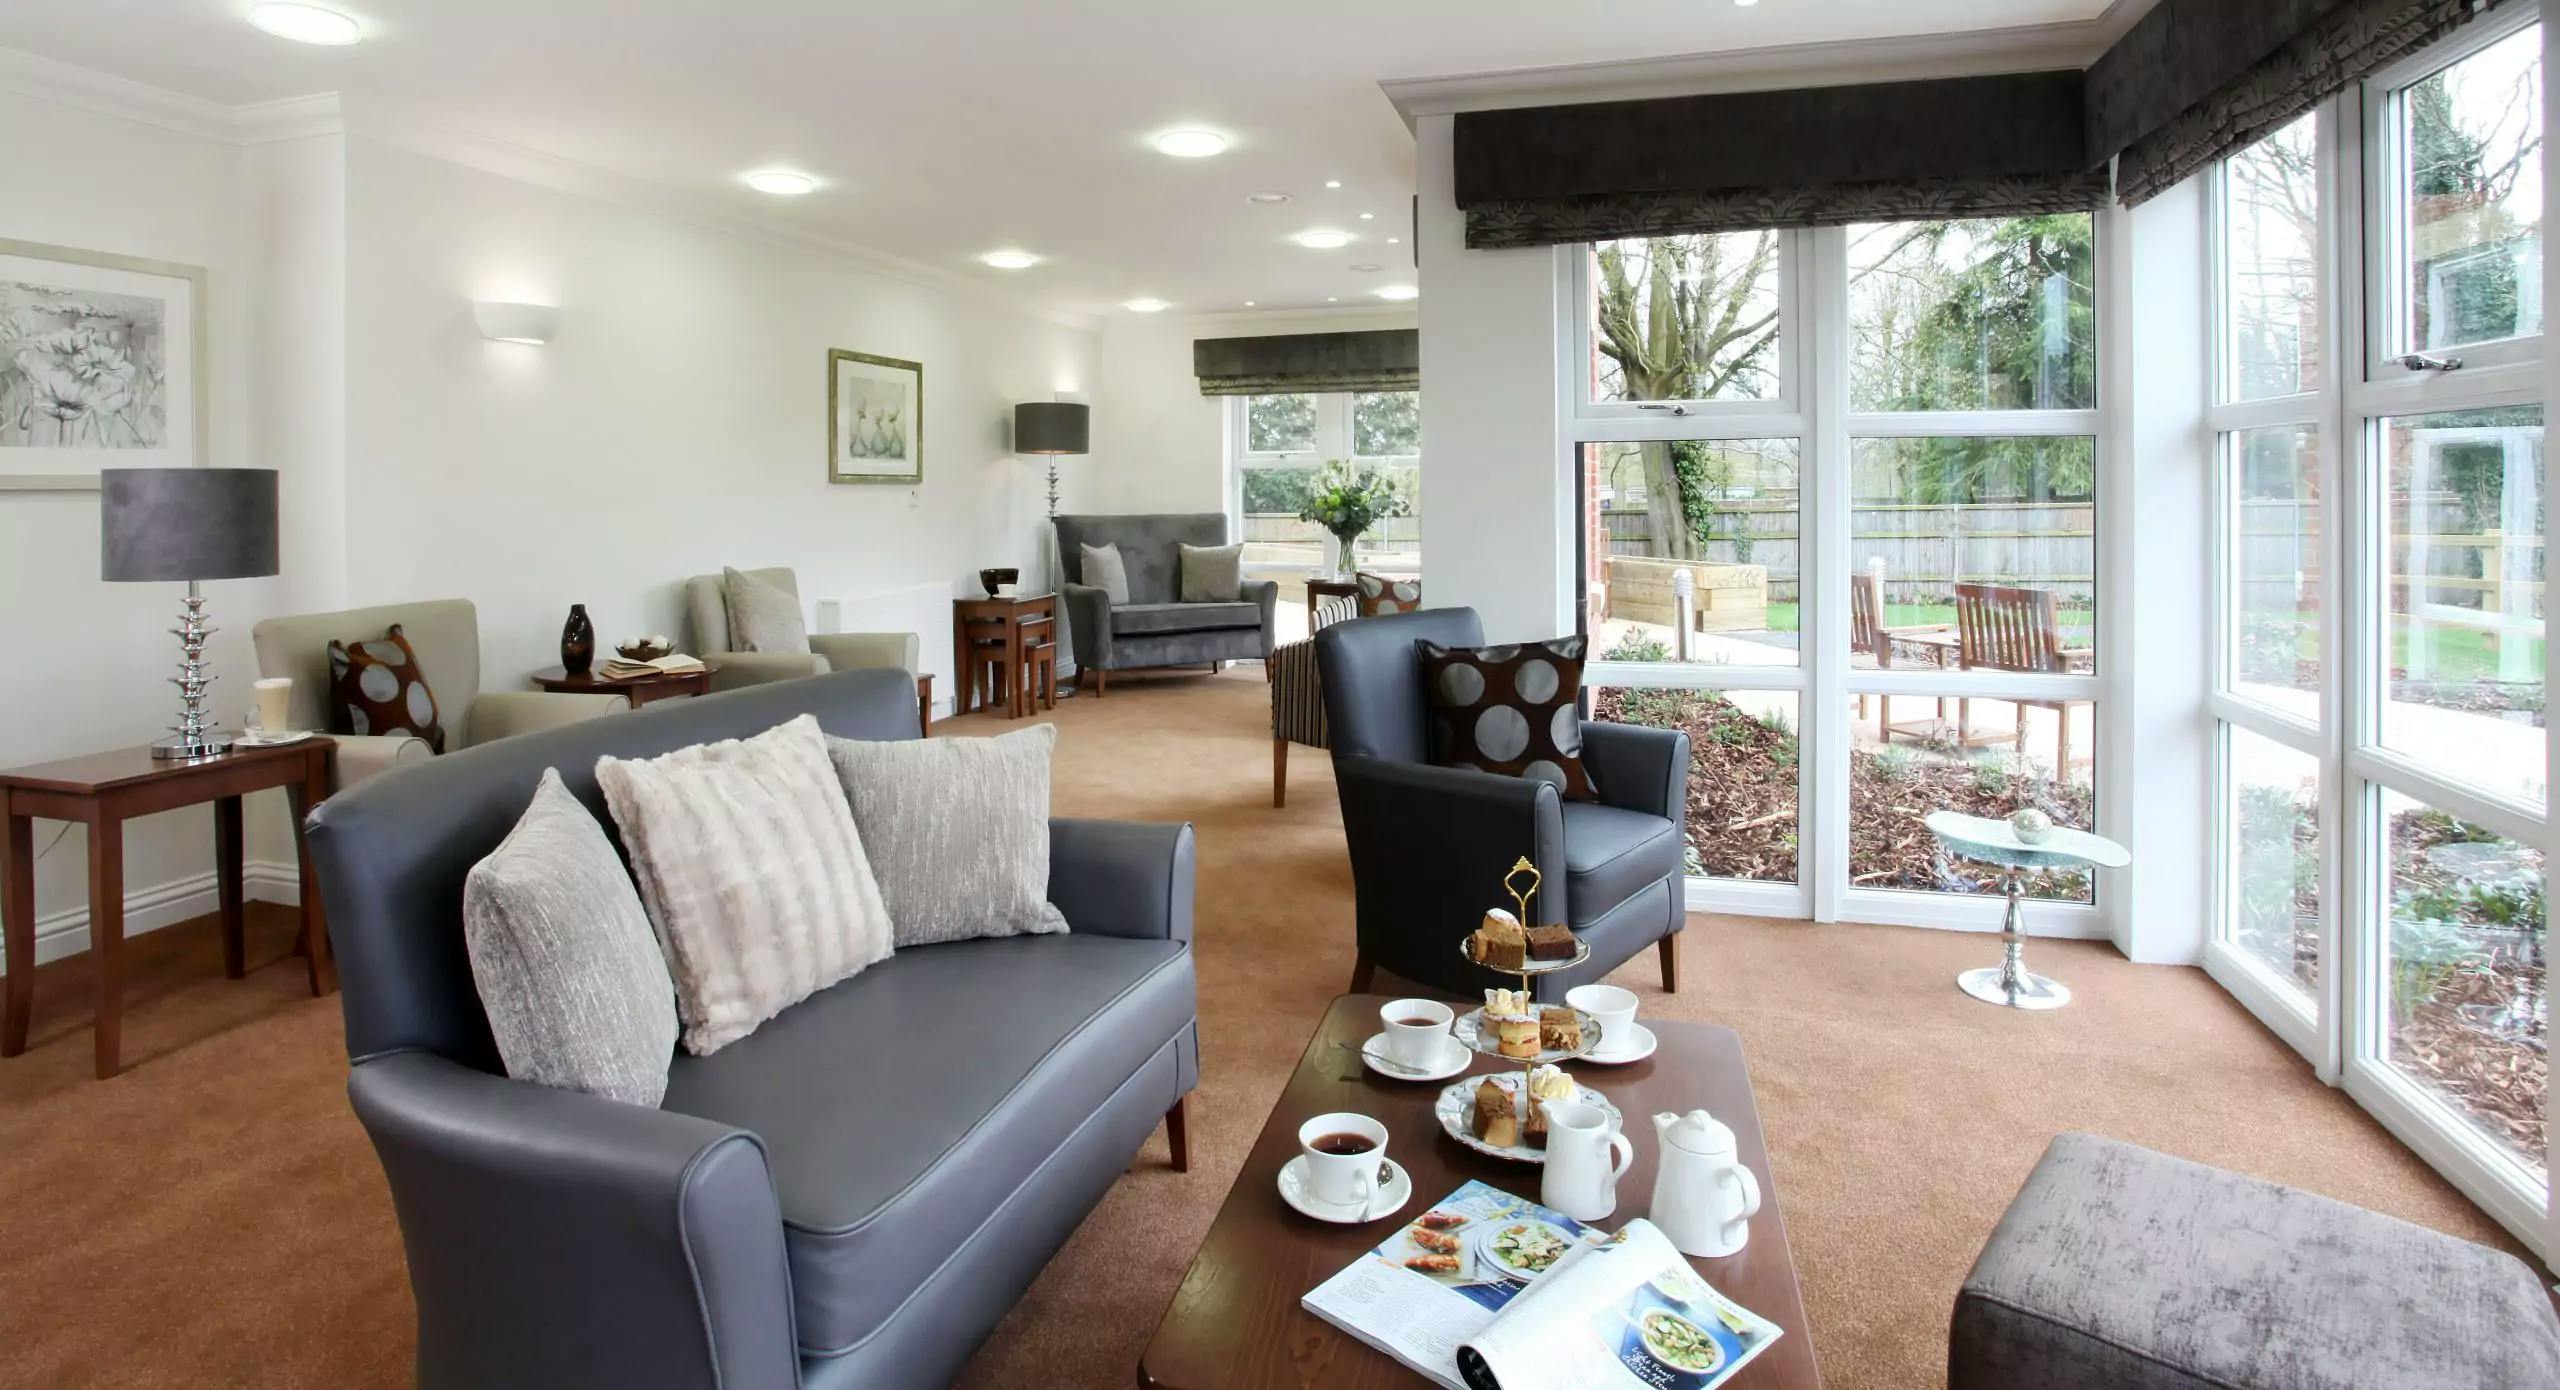 Communal Lounge at Bridge House Care Home in Abingdon, Oxfordshire